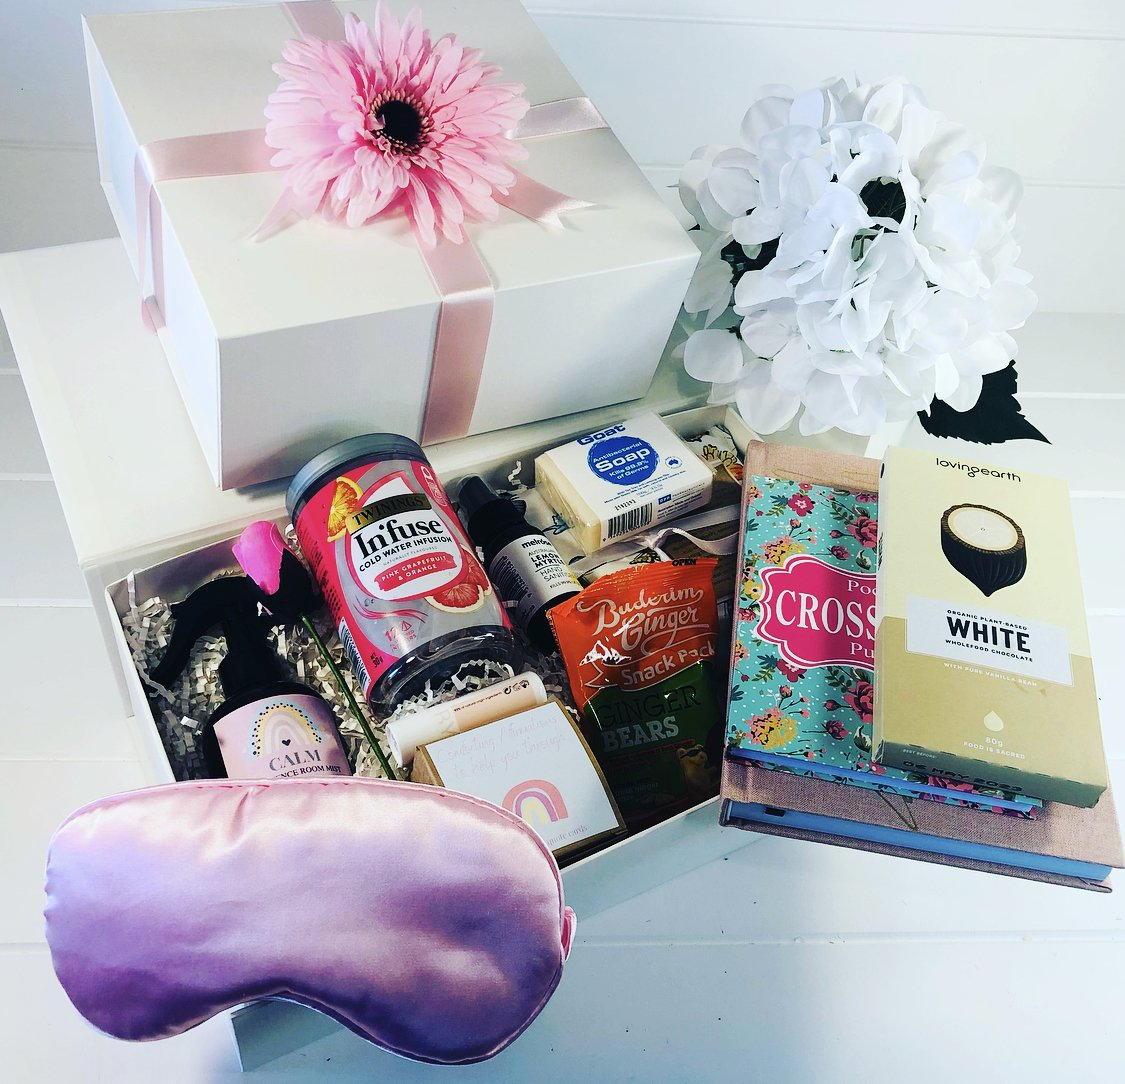 Cancer, Chemo & Radiation Therapy Gift Hampers